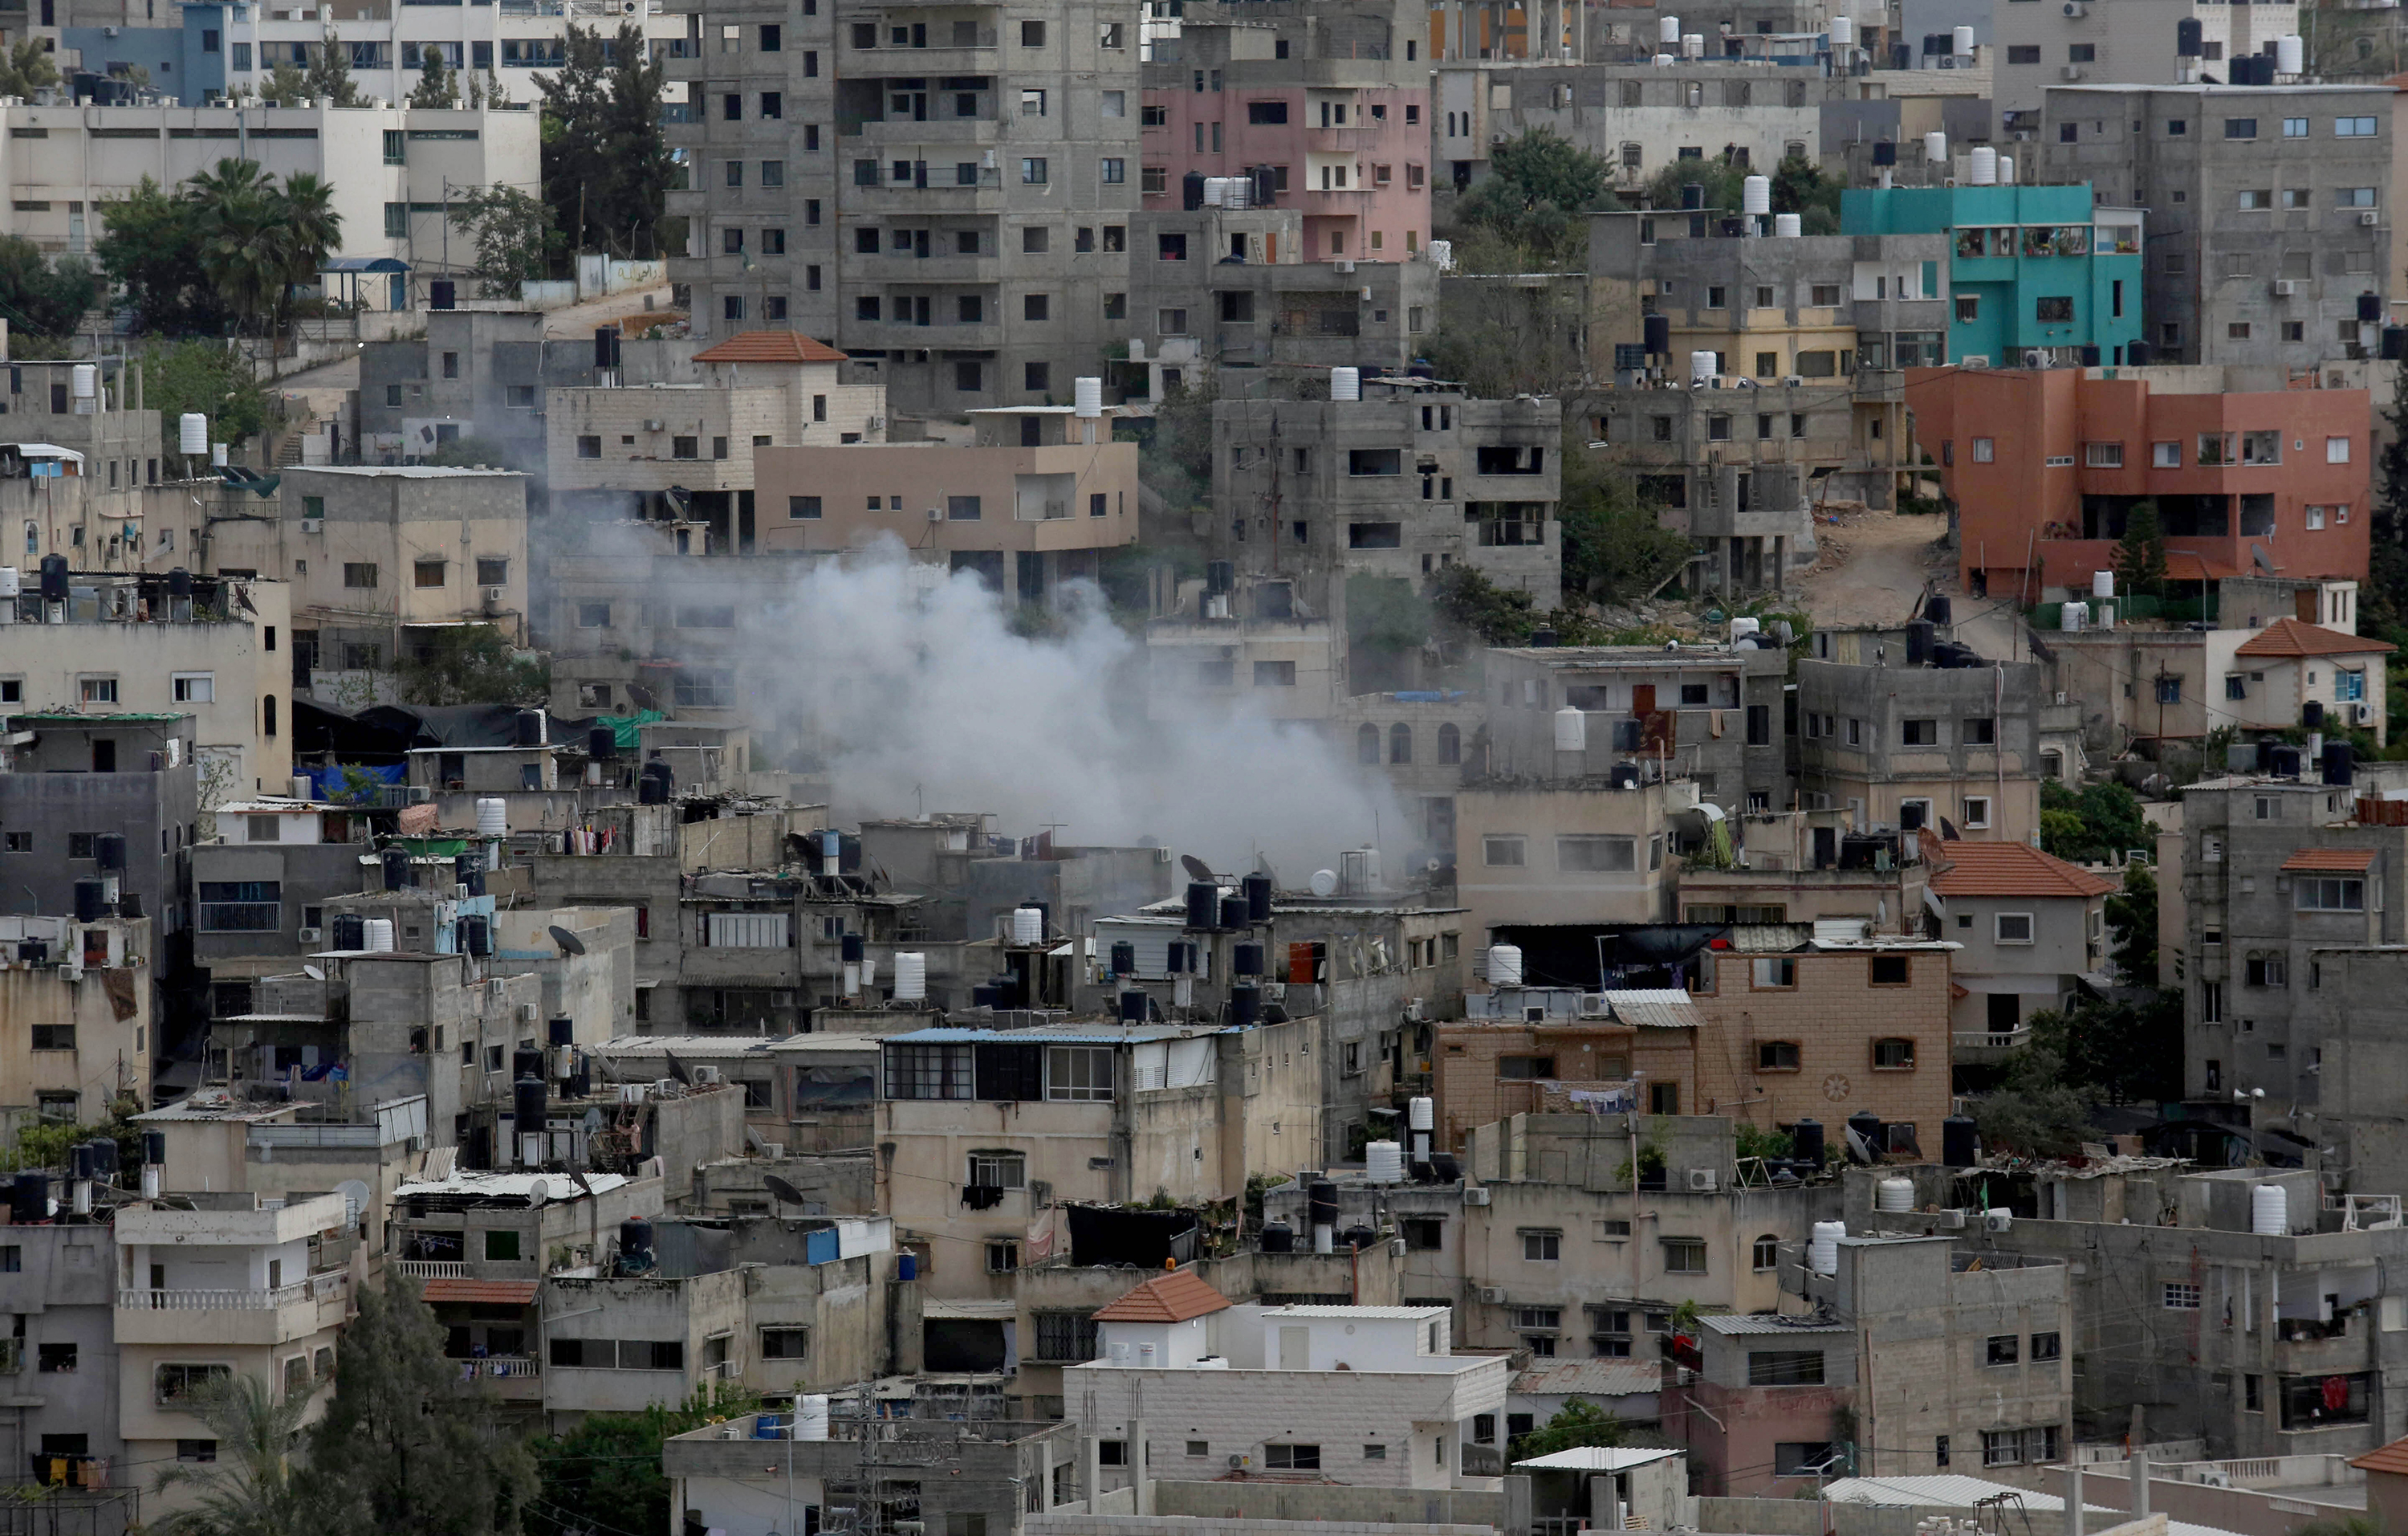 Smoke rises from a building in Tulkarm, West Bank on April 19.